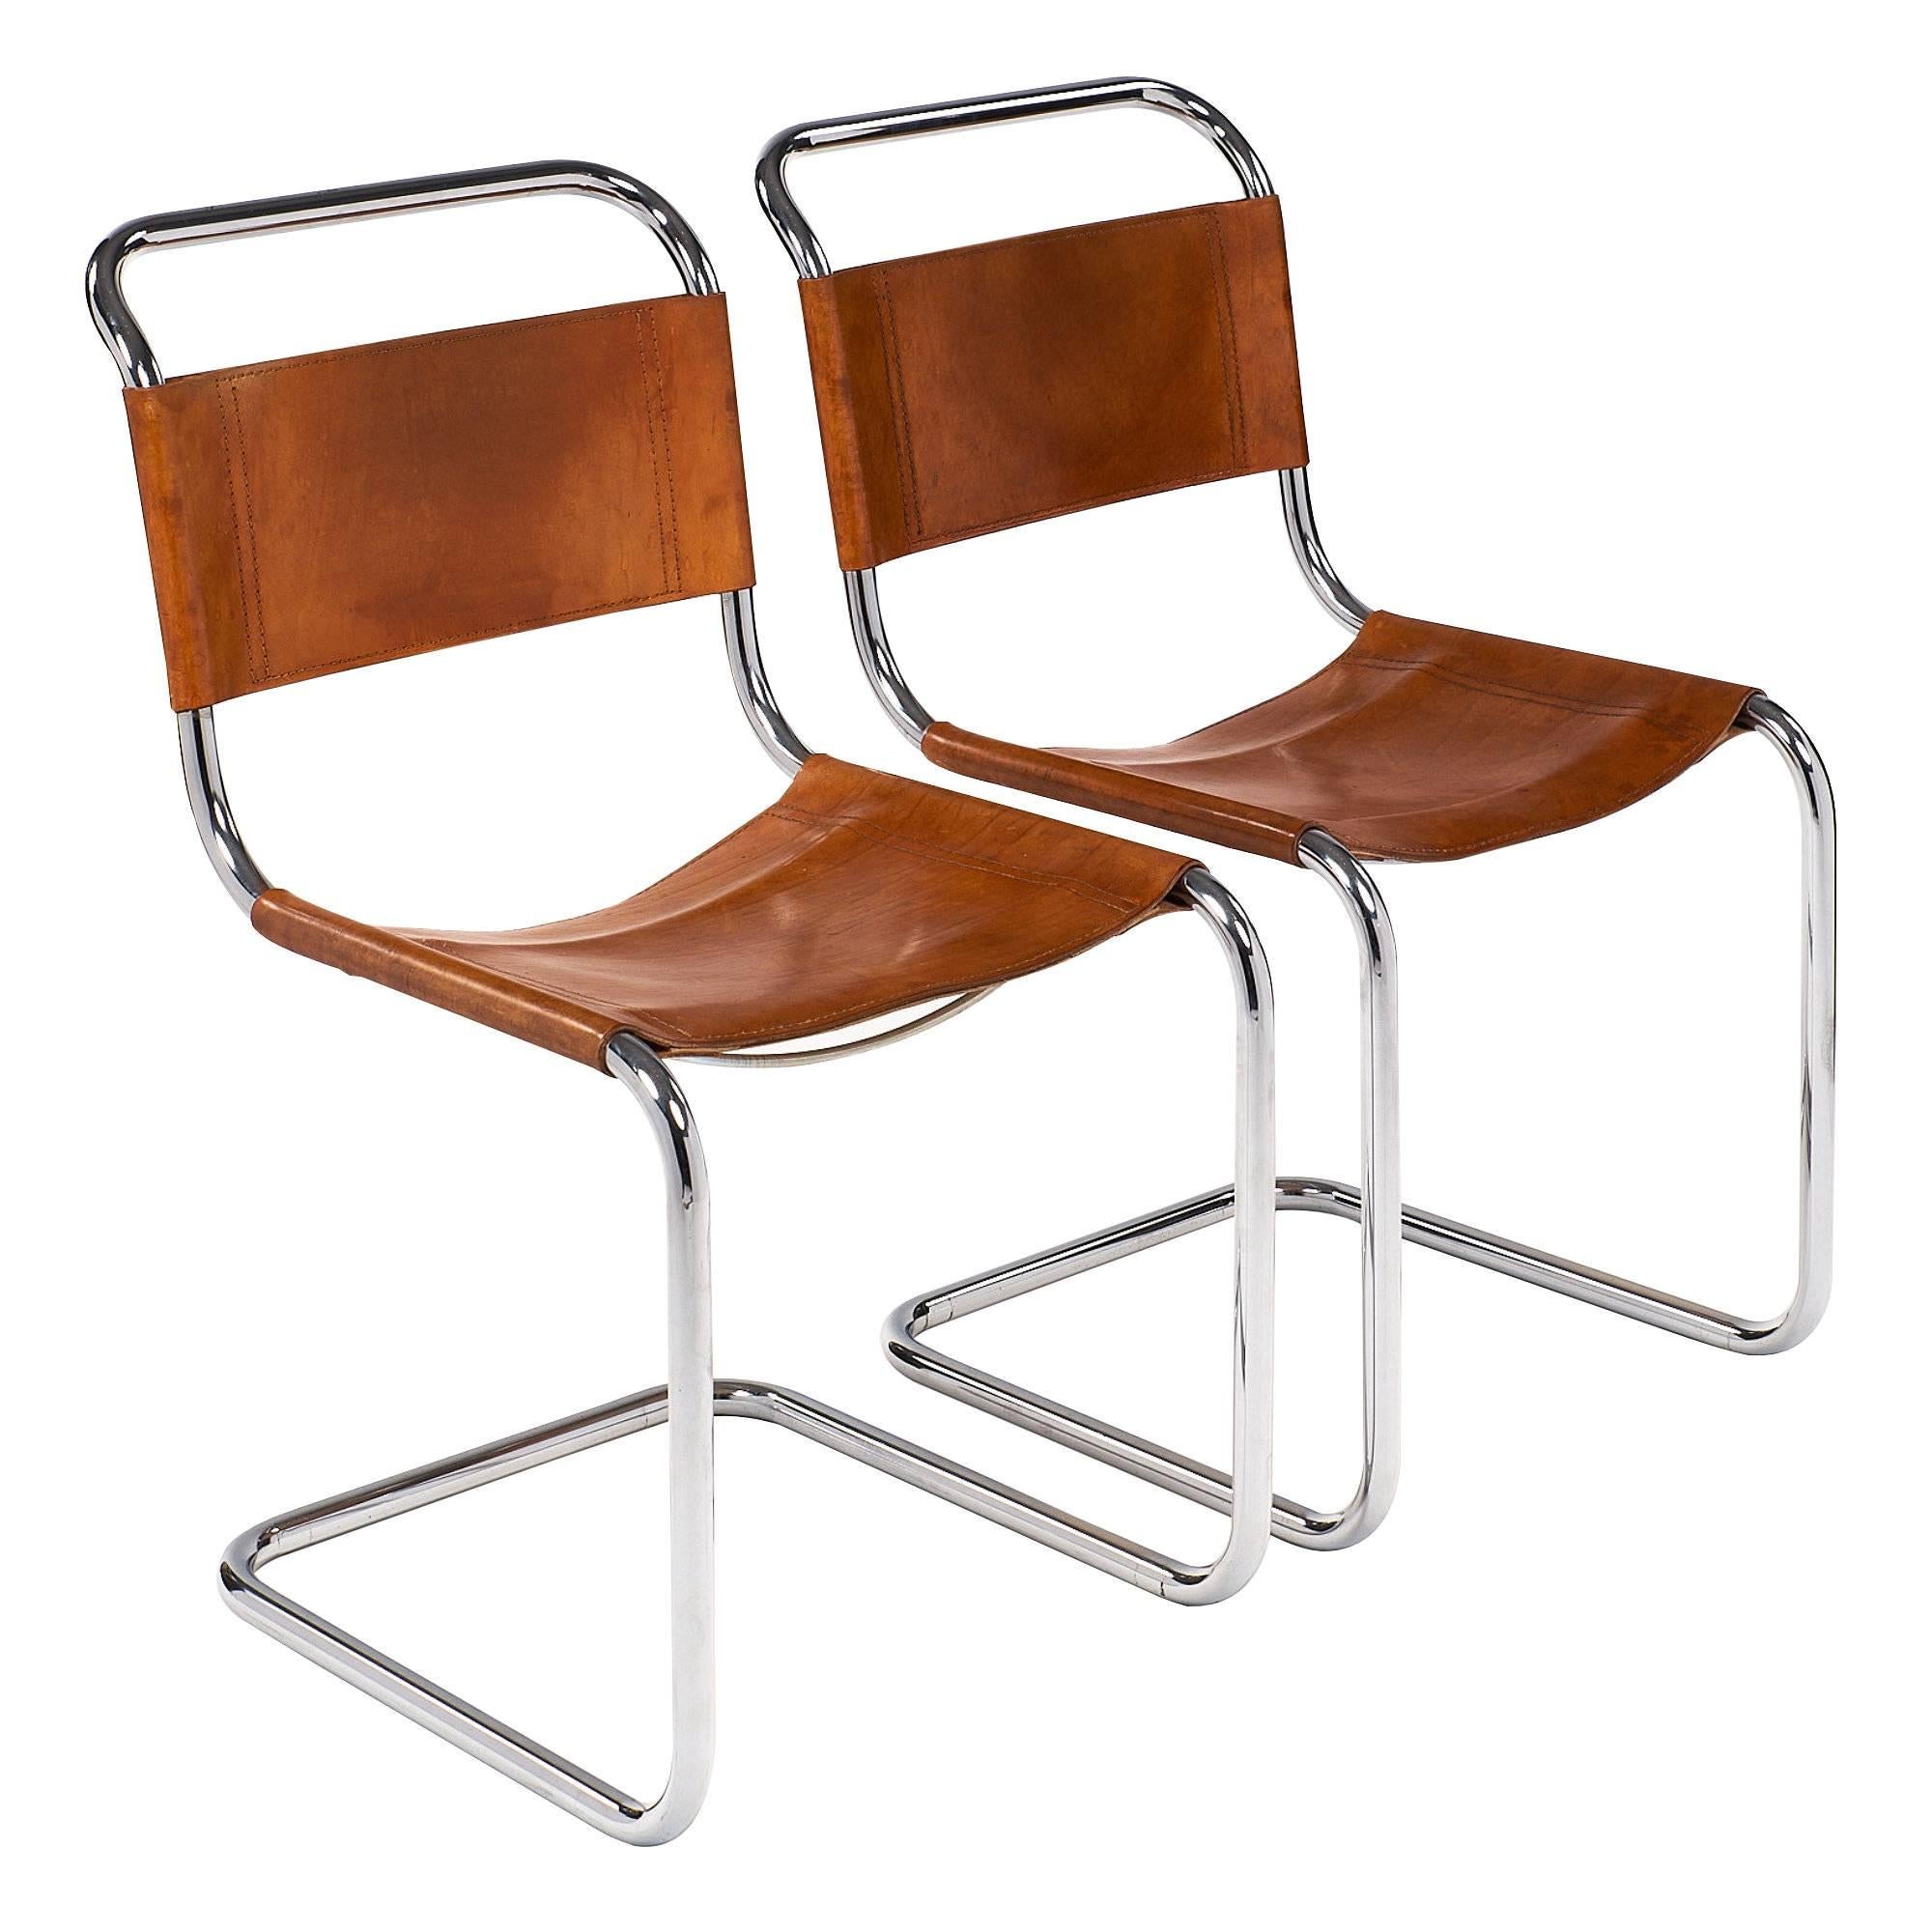 Vintage French Mies van der Rohe Side Chairs for Knoll